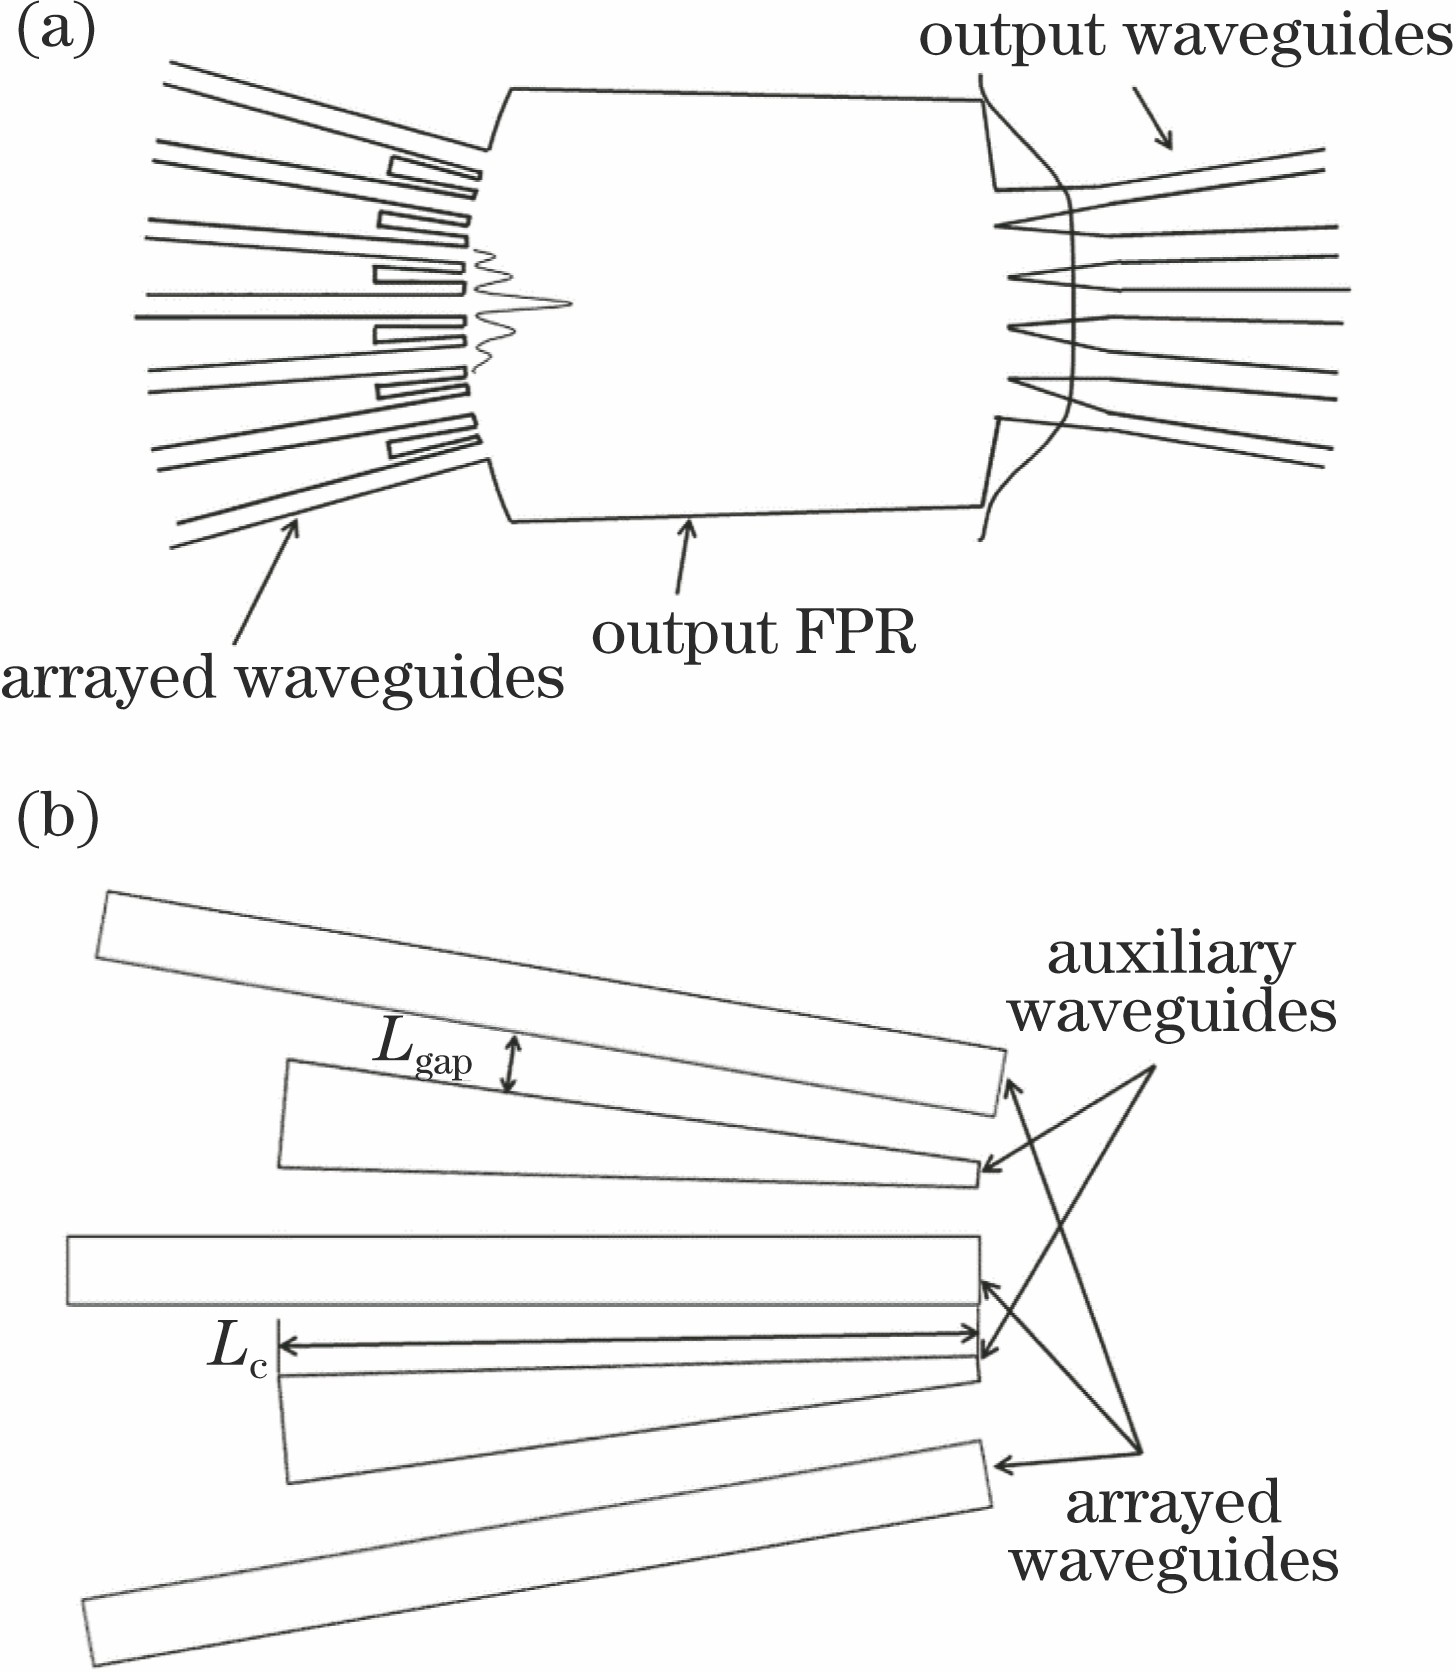 Desired far field distribution of the designed and the detailed structure of the auxiliary waveguides. (a) Desired waveguide array with auxiliary waveguides (expected sinc field distribution in the output of a single array waveguide and the flat-topped field distribution in the output image plane are indicated in the figure); (b) detailed structure of auxiliary waveguides